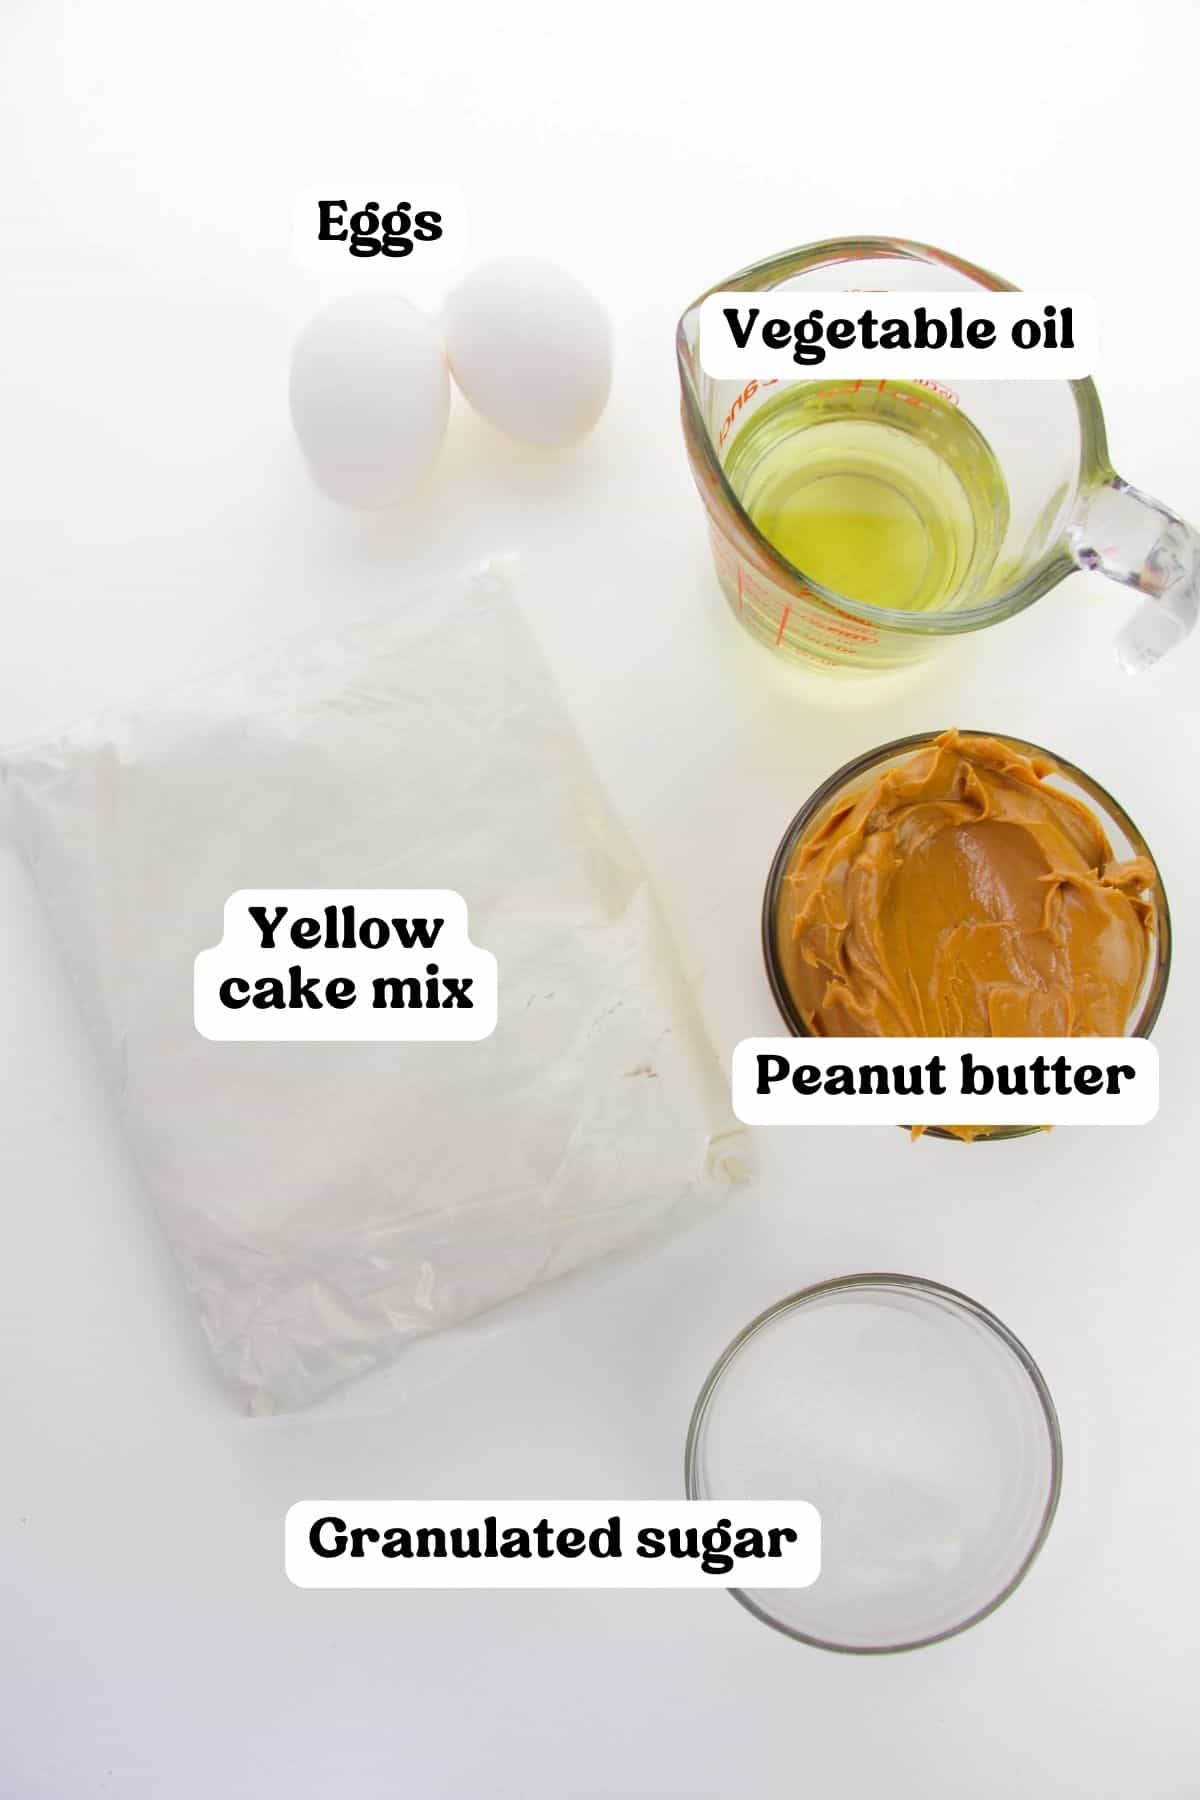 Bag of yellow cake mix, oil, peanut butter, granulated sugar, and 2 eggs.